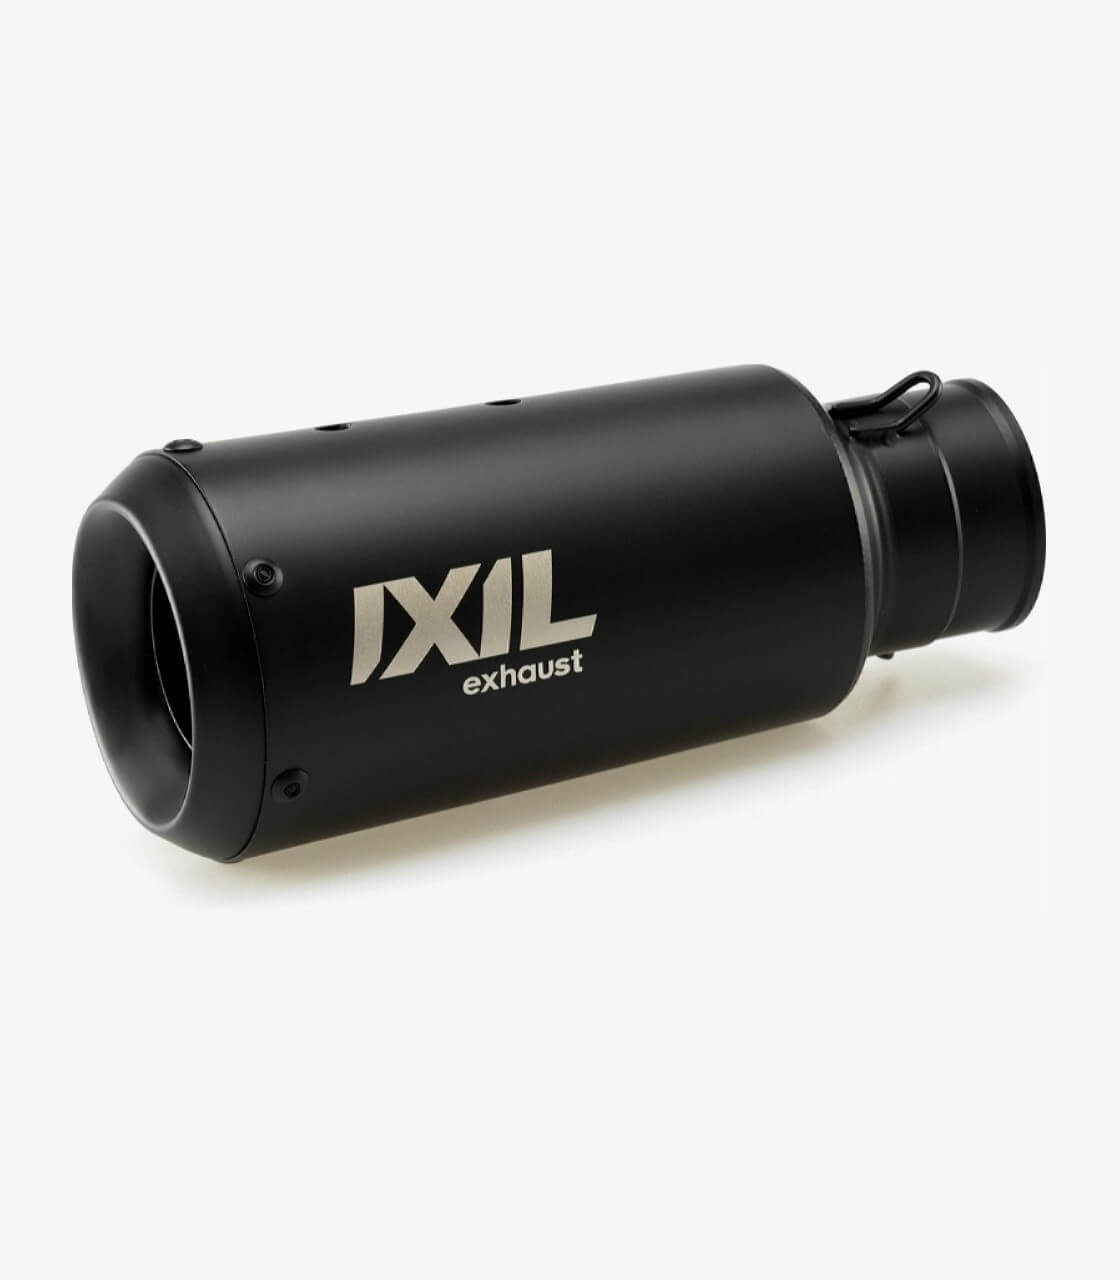 motorcycle exhaust black color of Ixil Exhaust